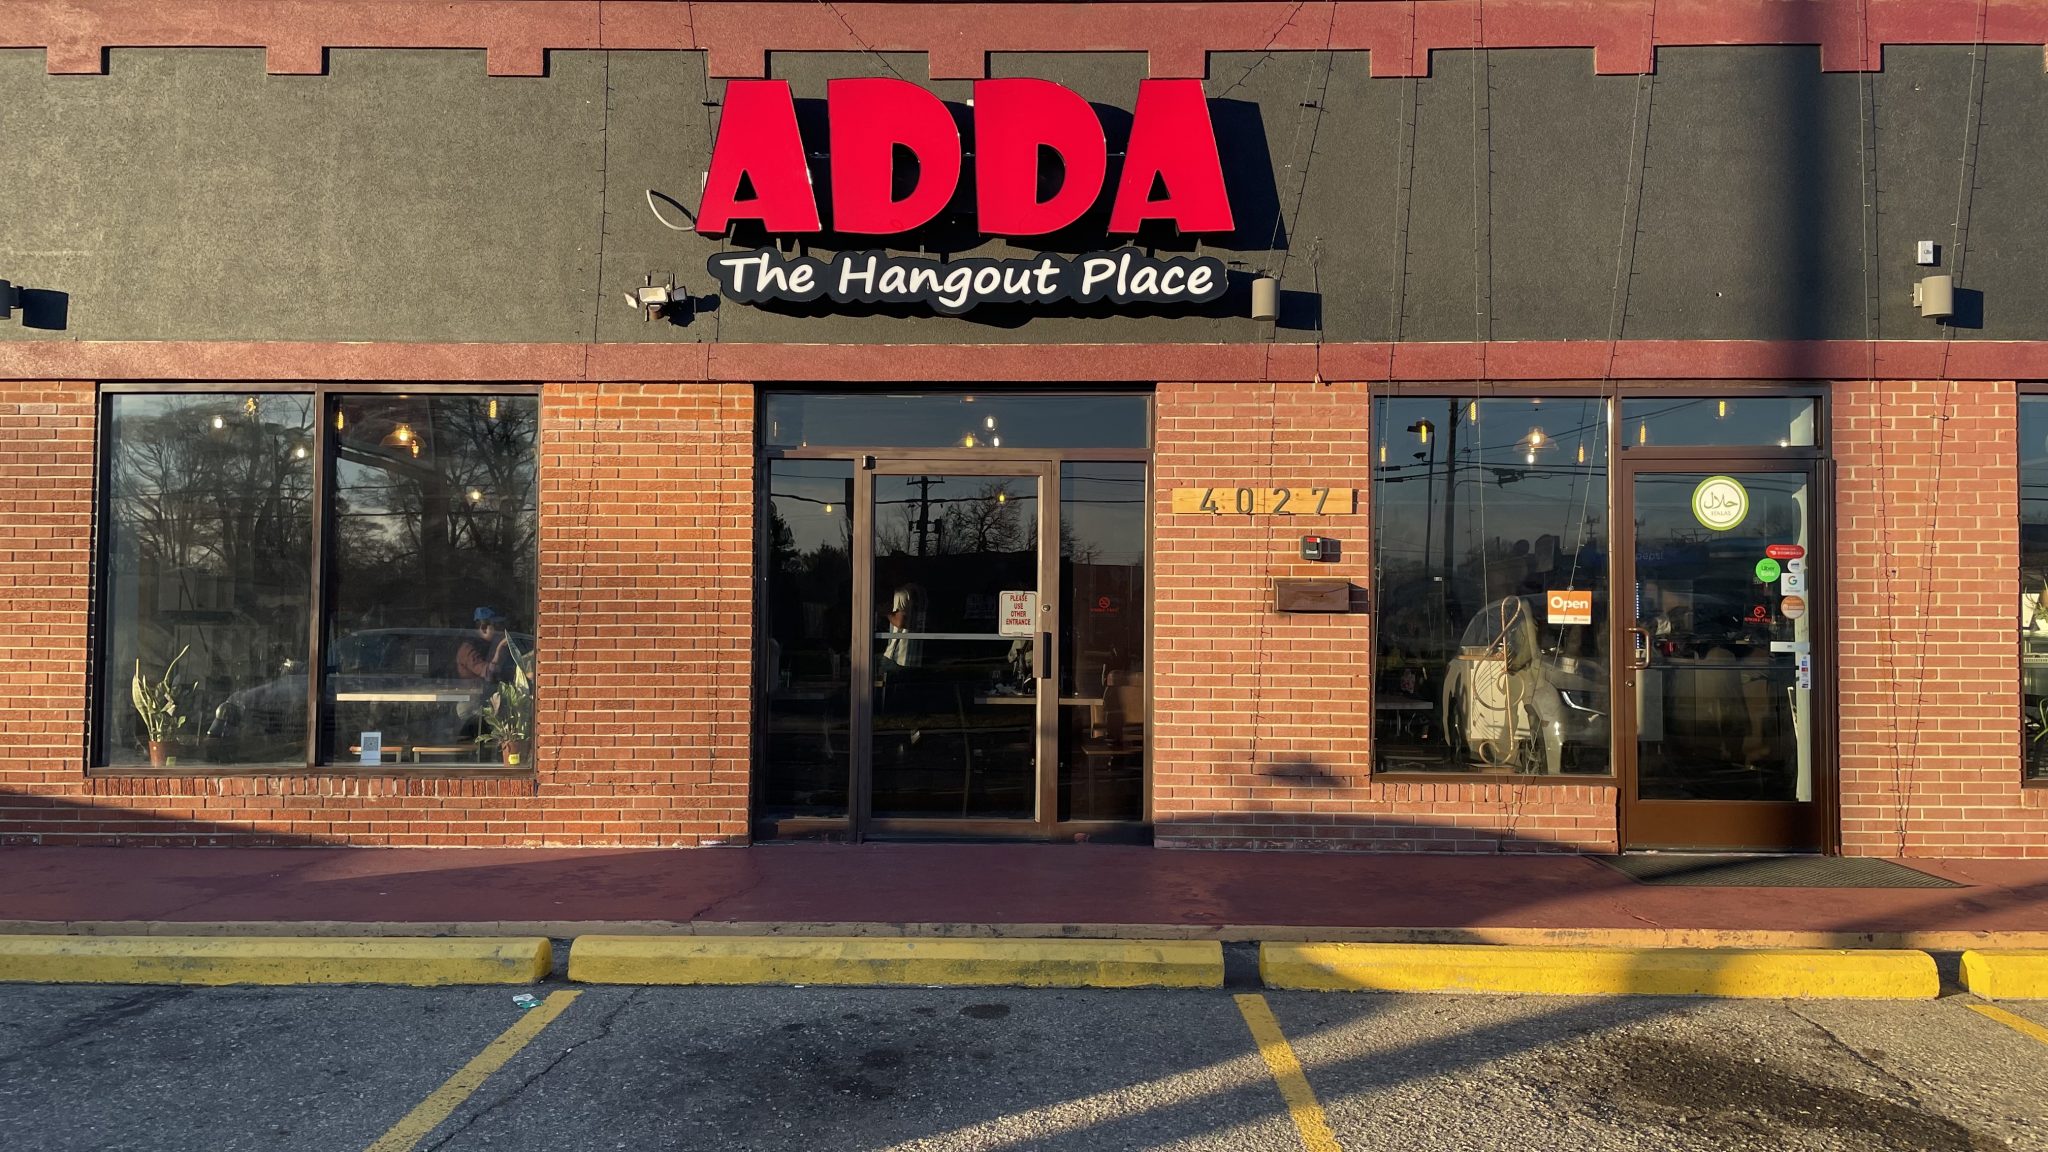 exterior of a brick building with a sign that reads "Adda: The Hangout Place"